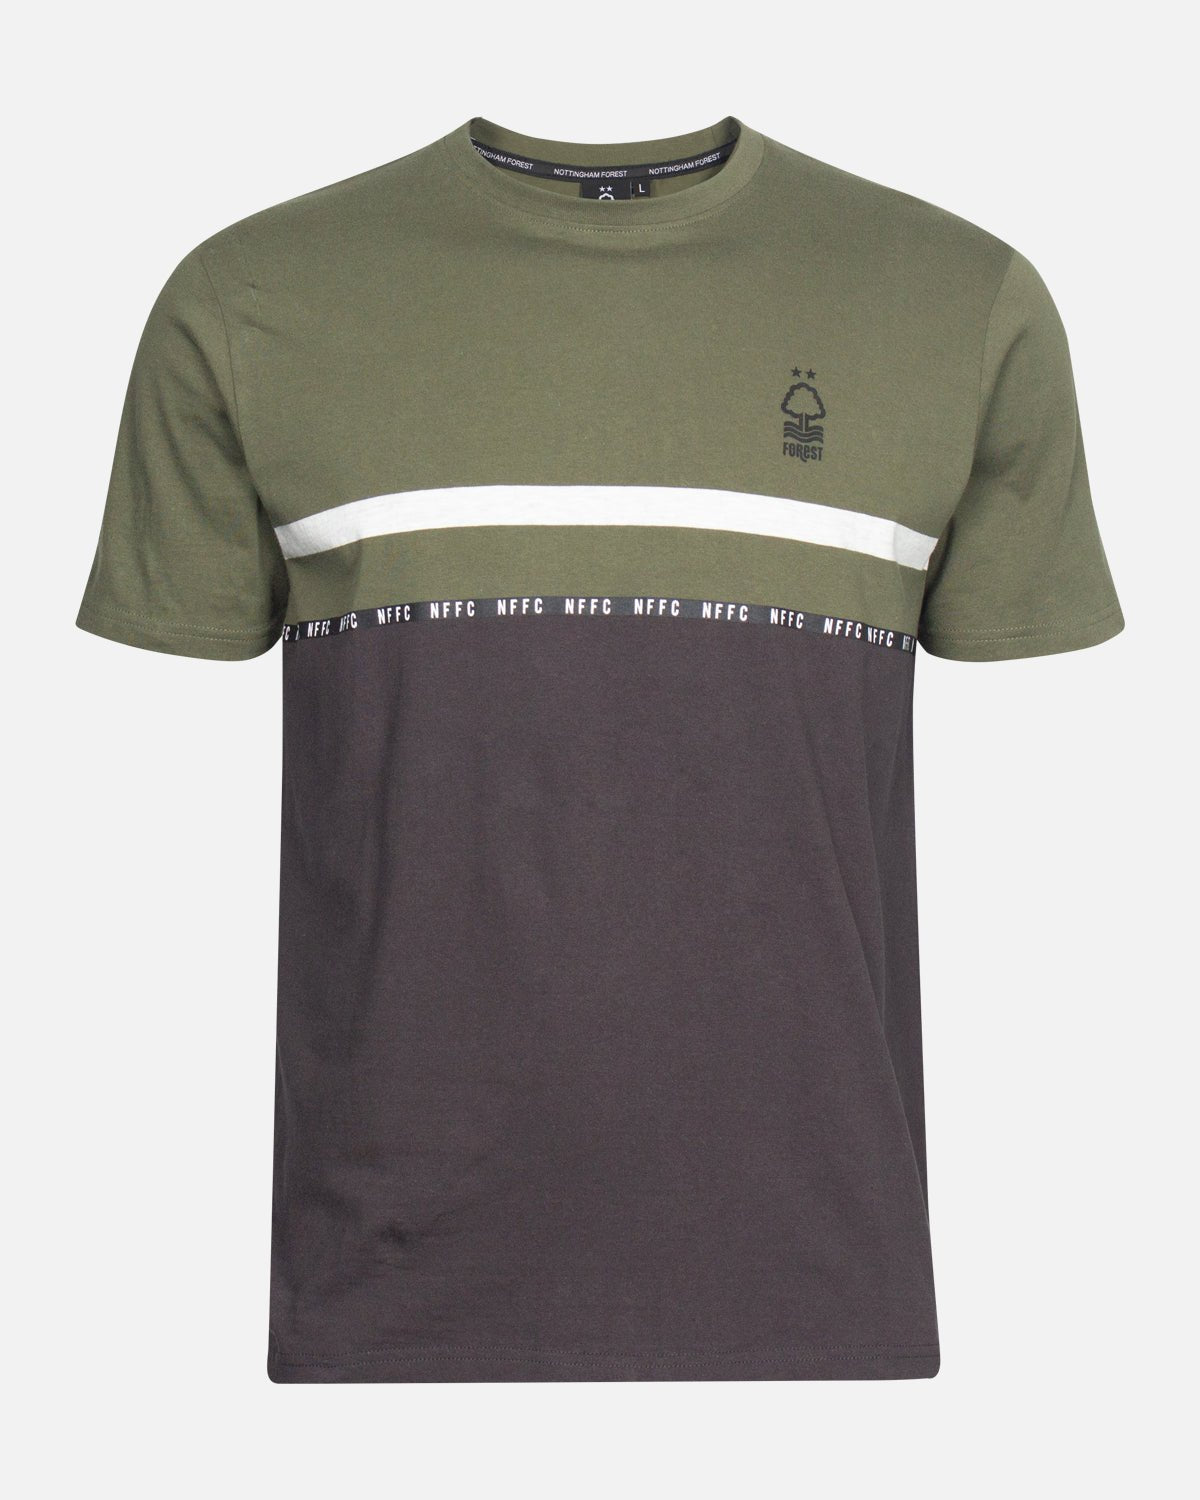 NFFC Taped T-Shirt - Nottingham Forest FC